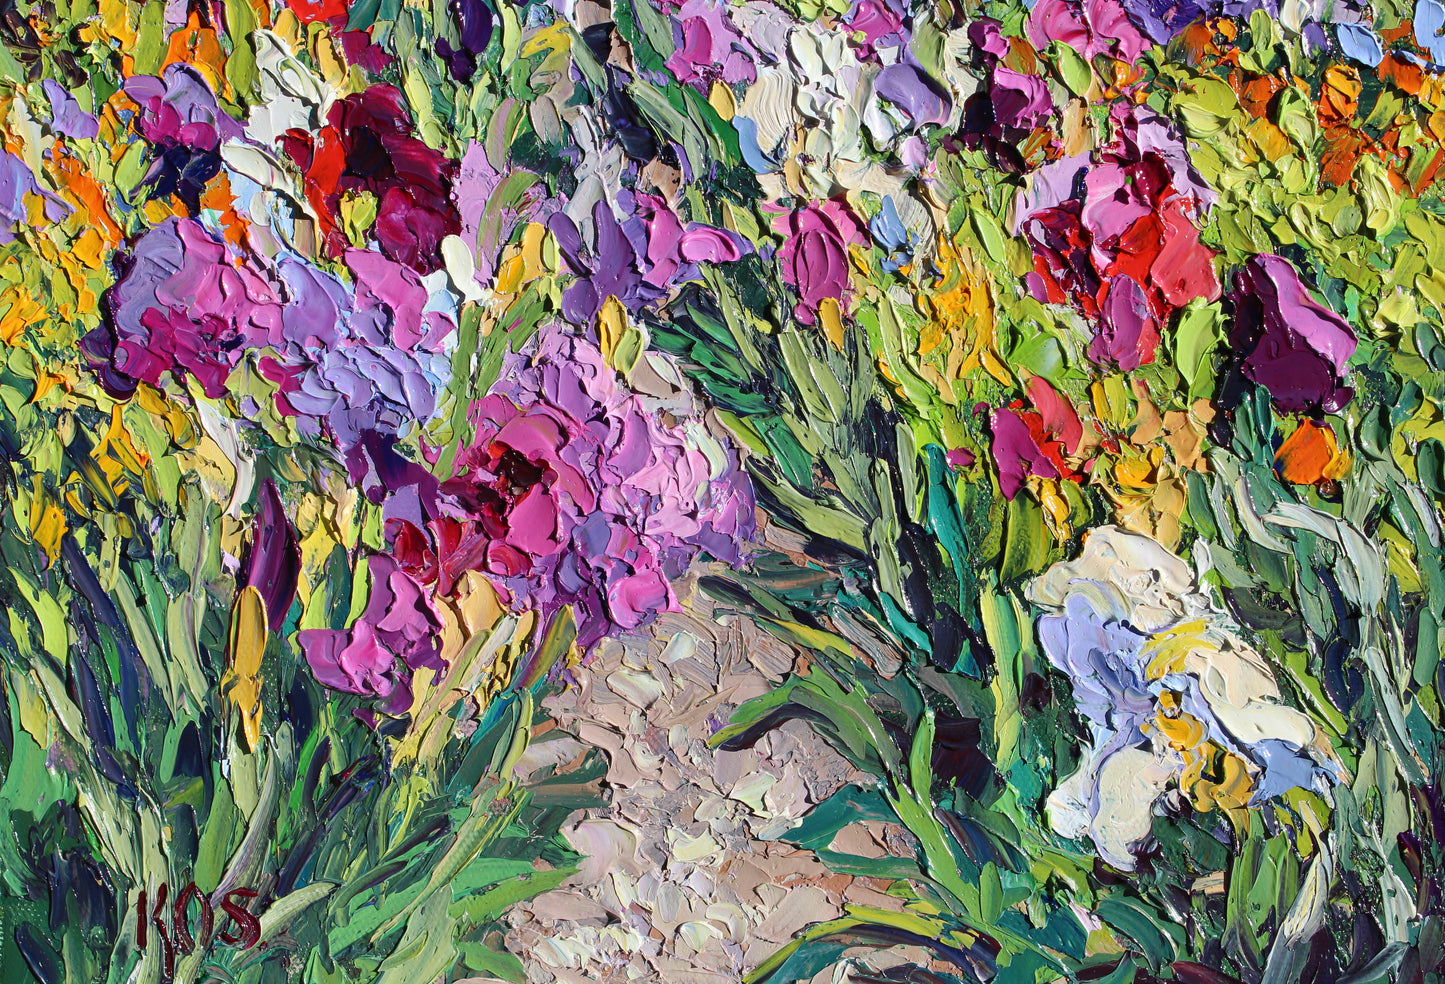 Monet's Flower Garden, An Original 14" x 11" Oil Painting On Canvas Of Colorful Impasto Flowers At Giverny